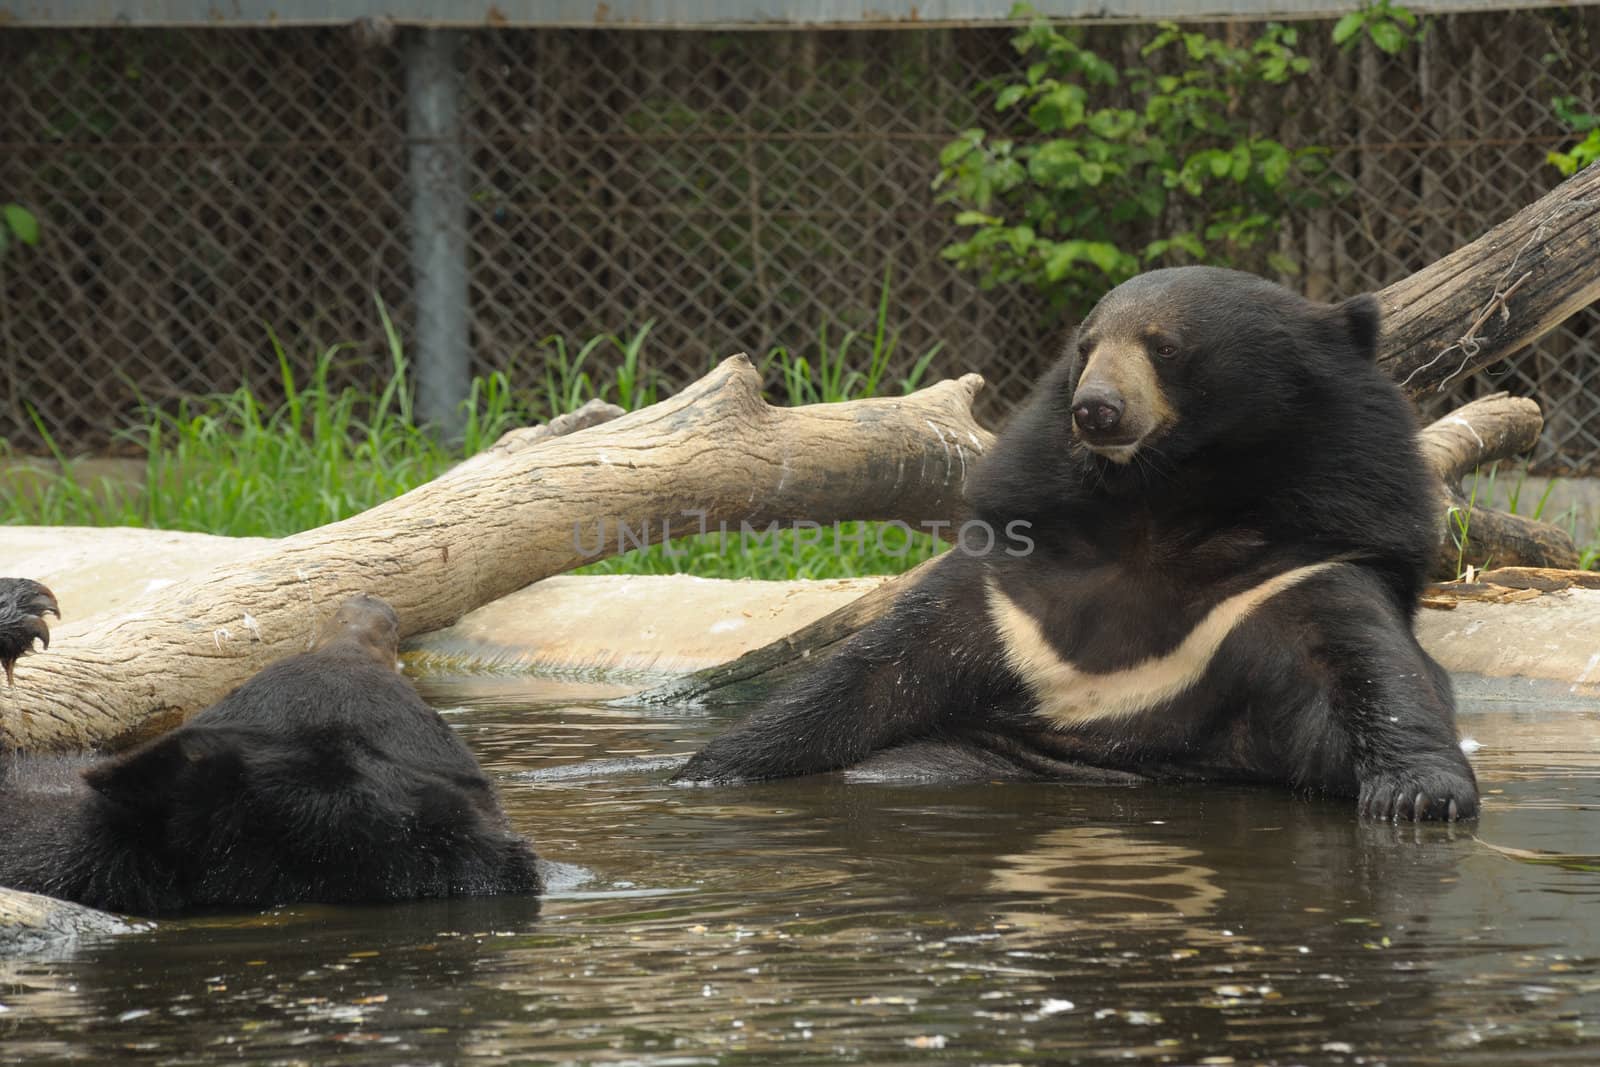 The Asiatic black bear relax in basin Thailand zoo.